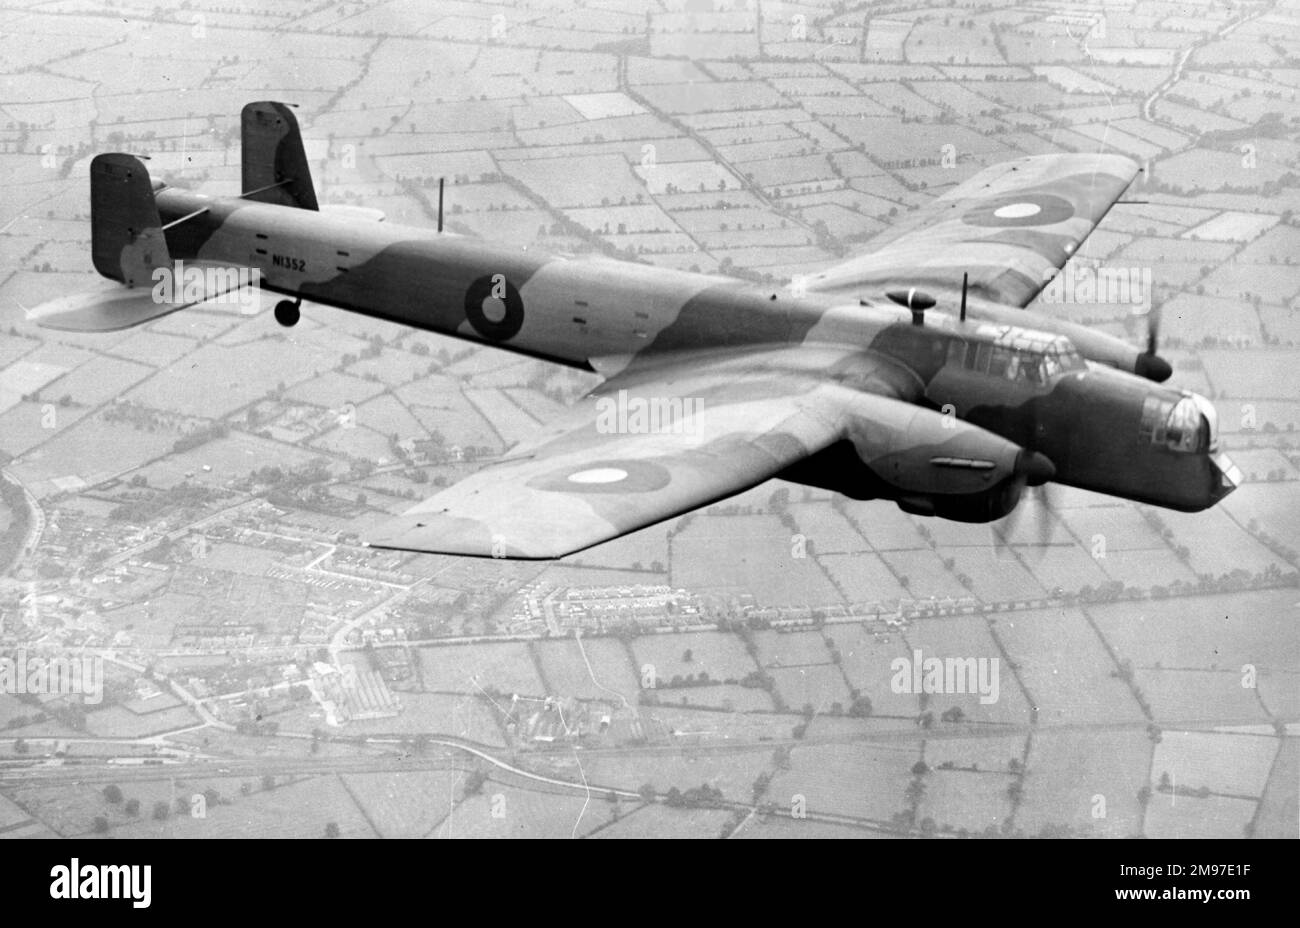 Armstrong Whitworth AW 38 Whitley V -withdrawn from front-line service in late 1942, the Whitley continued to serve as a transport, submarine hunter and paratroop trainer. Stock Photo